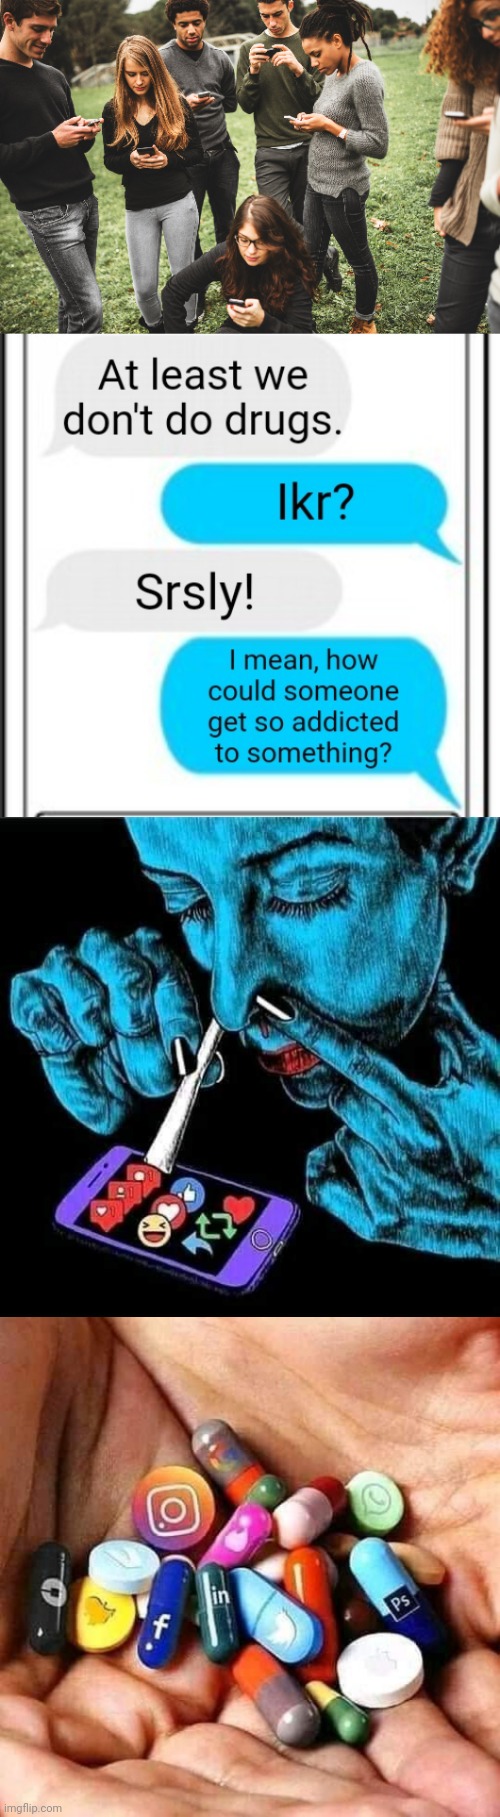 The new addiction | image tagged in cellphone,addiction,social media,new,drug | made w/ Imgflip meme maker